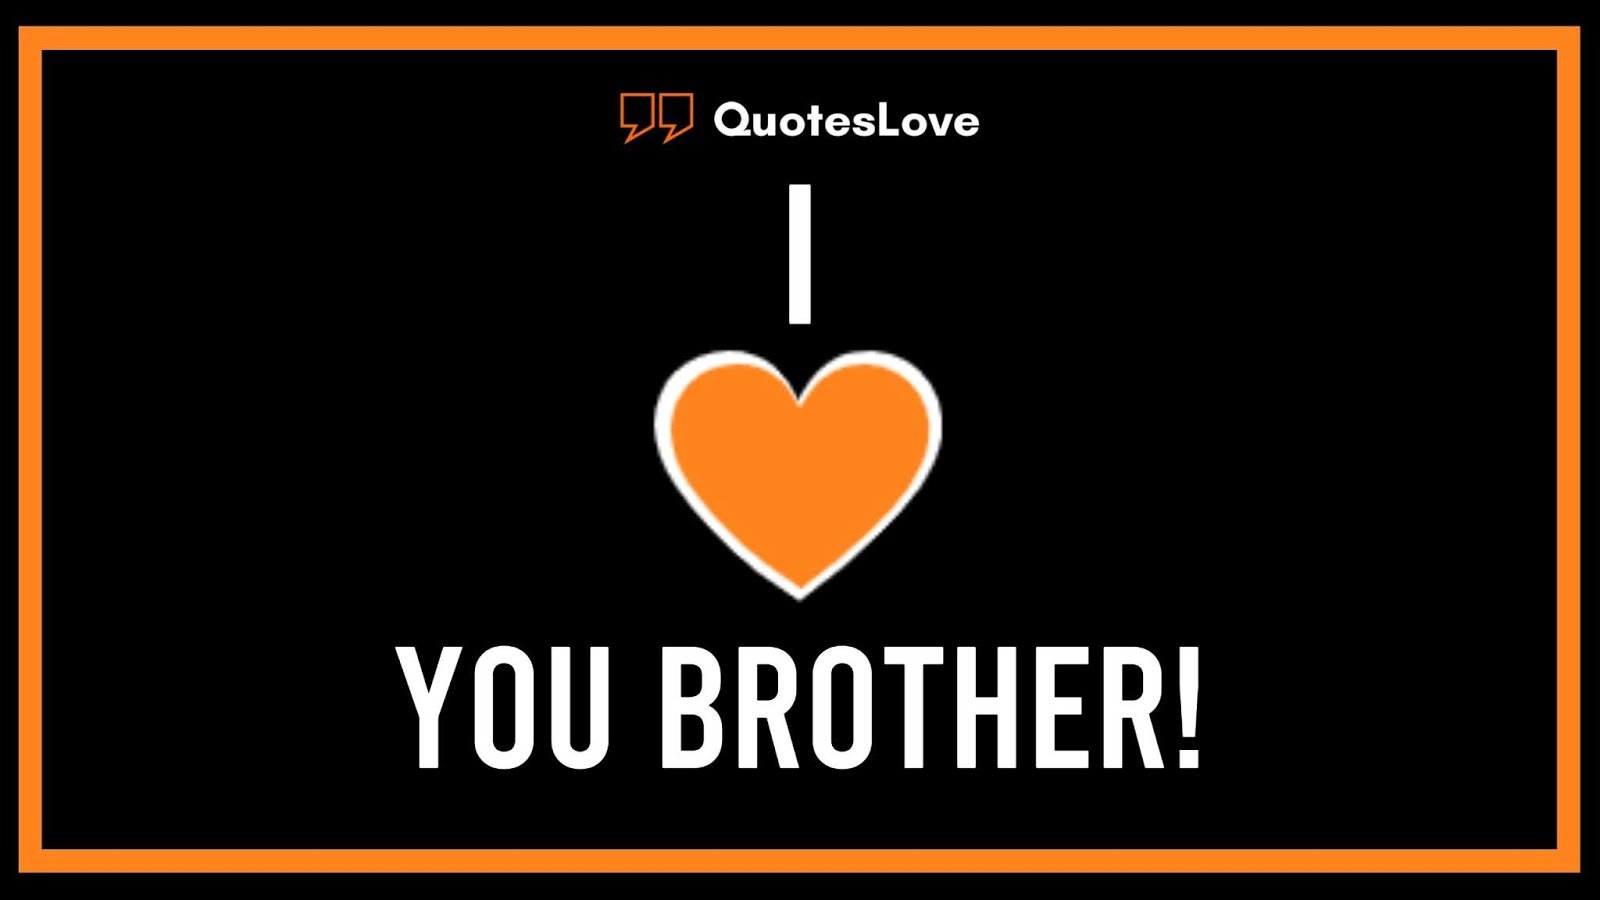 [Best] Brother's Day 2022: Quotes, Messages, Sayings, Wishes, Greetings, Image, Picture, Photo